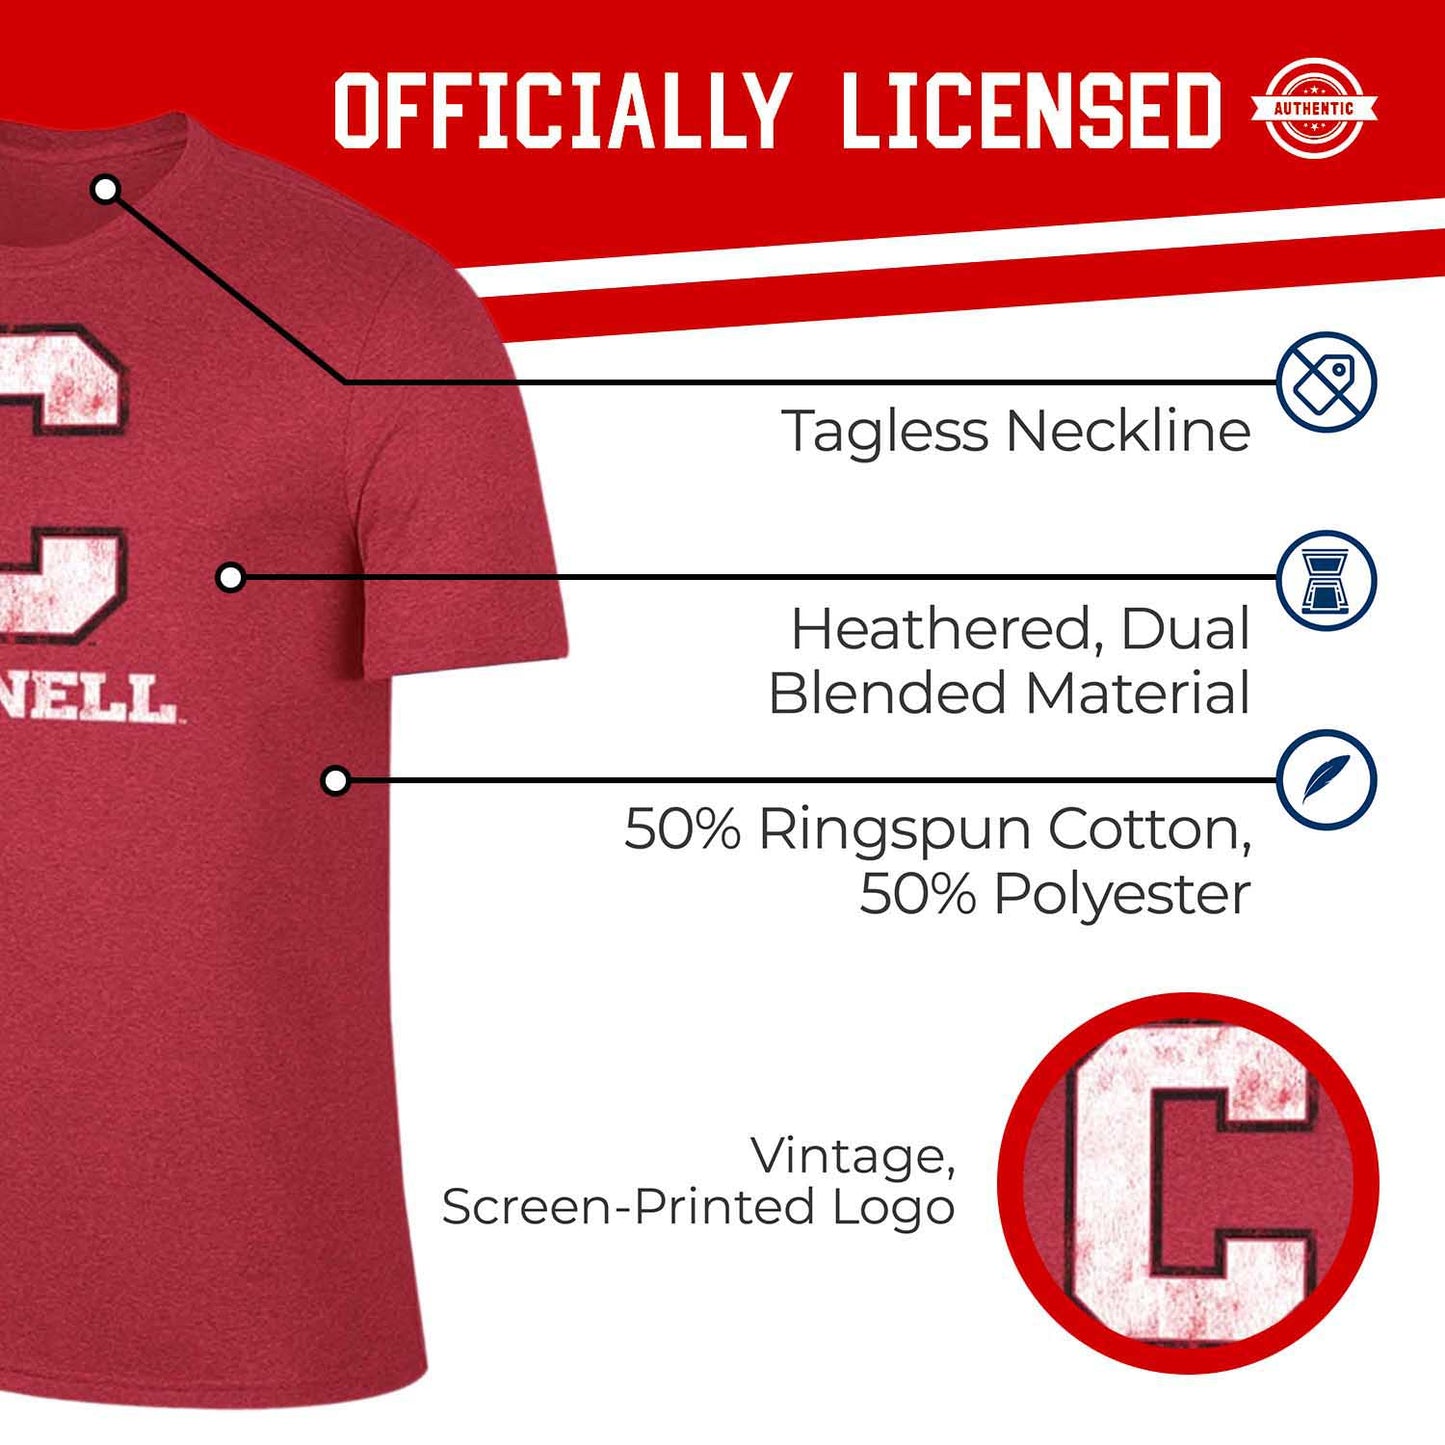 Cornell Big Red Adult MVP Heathered Cotton Blend T-Shirt - Red